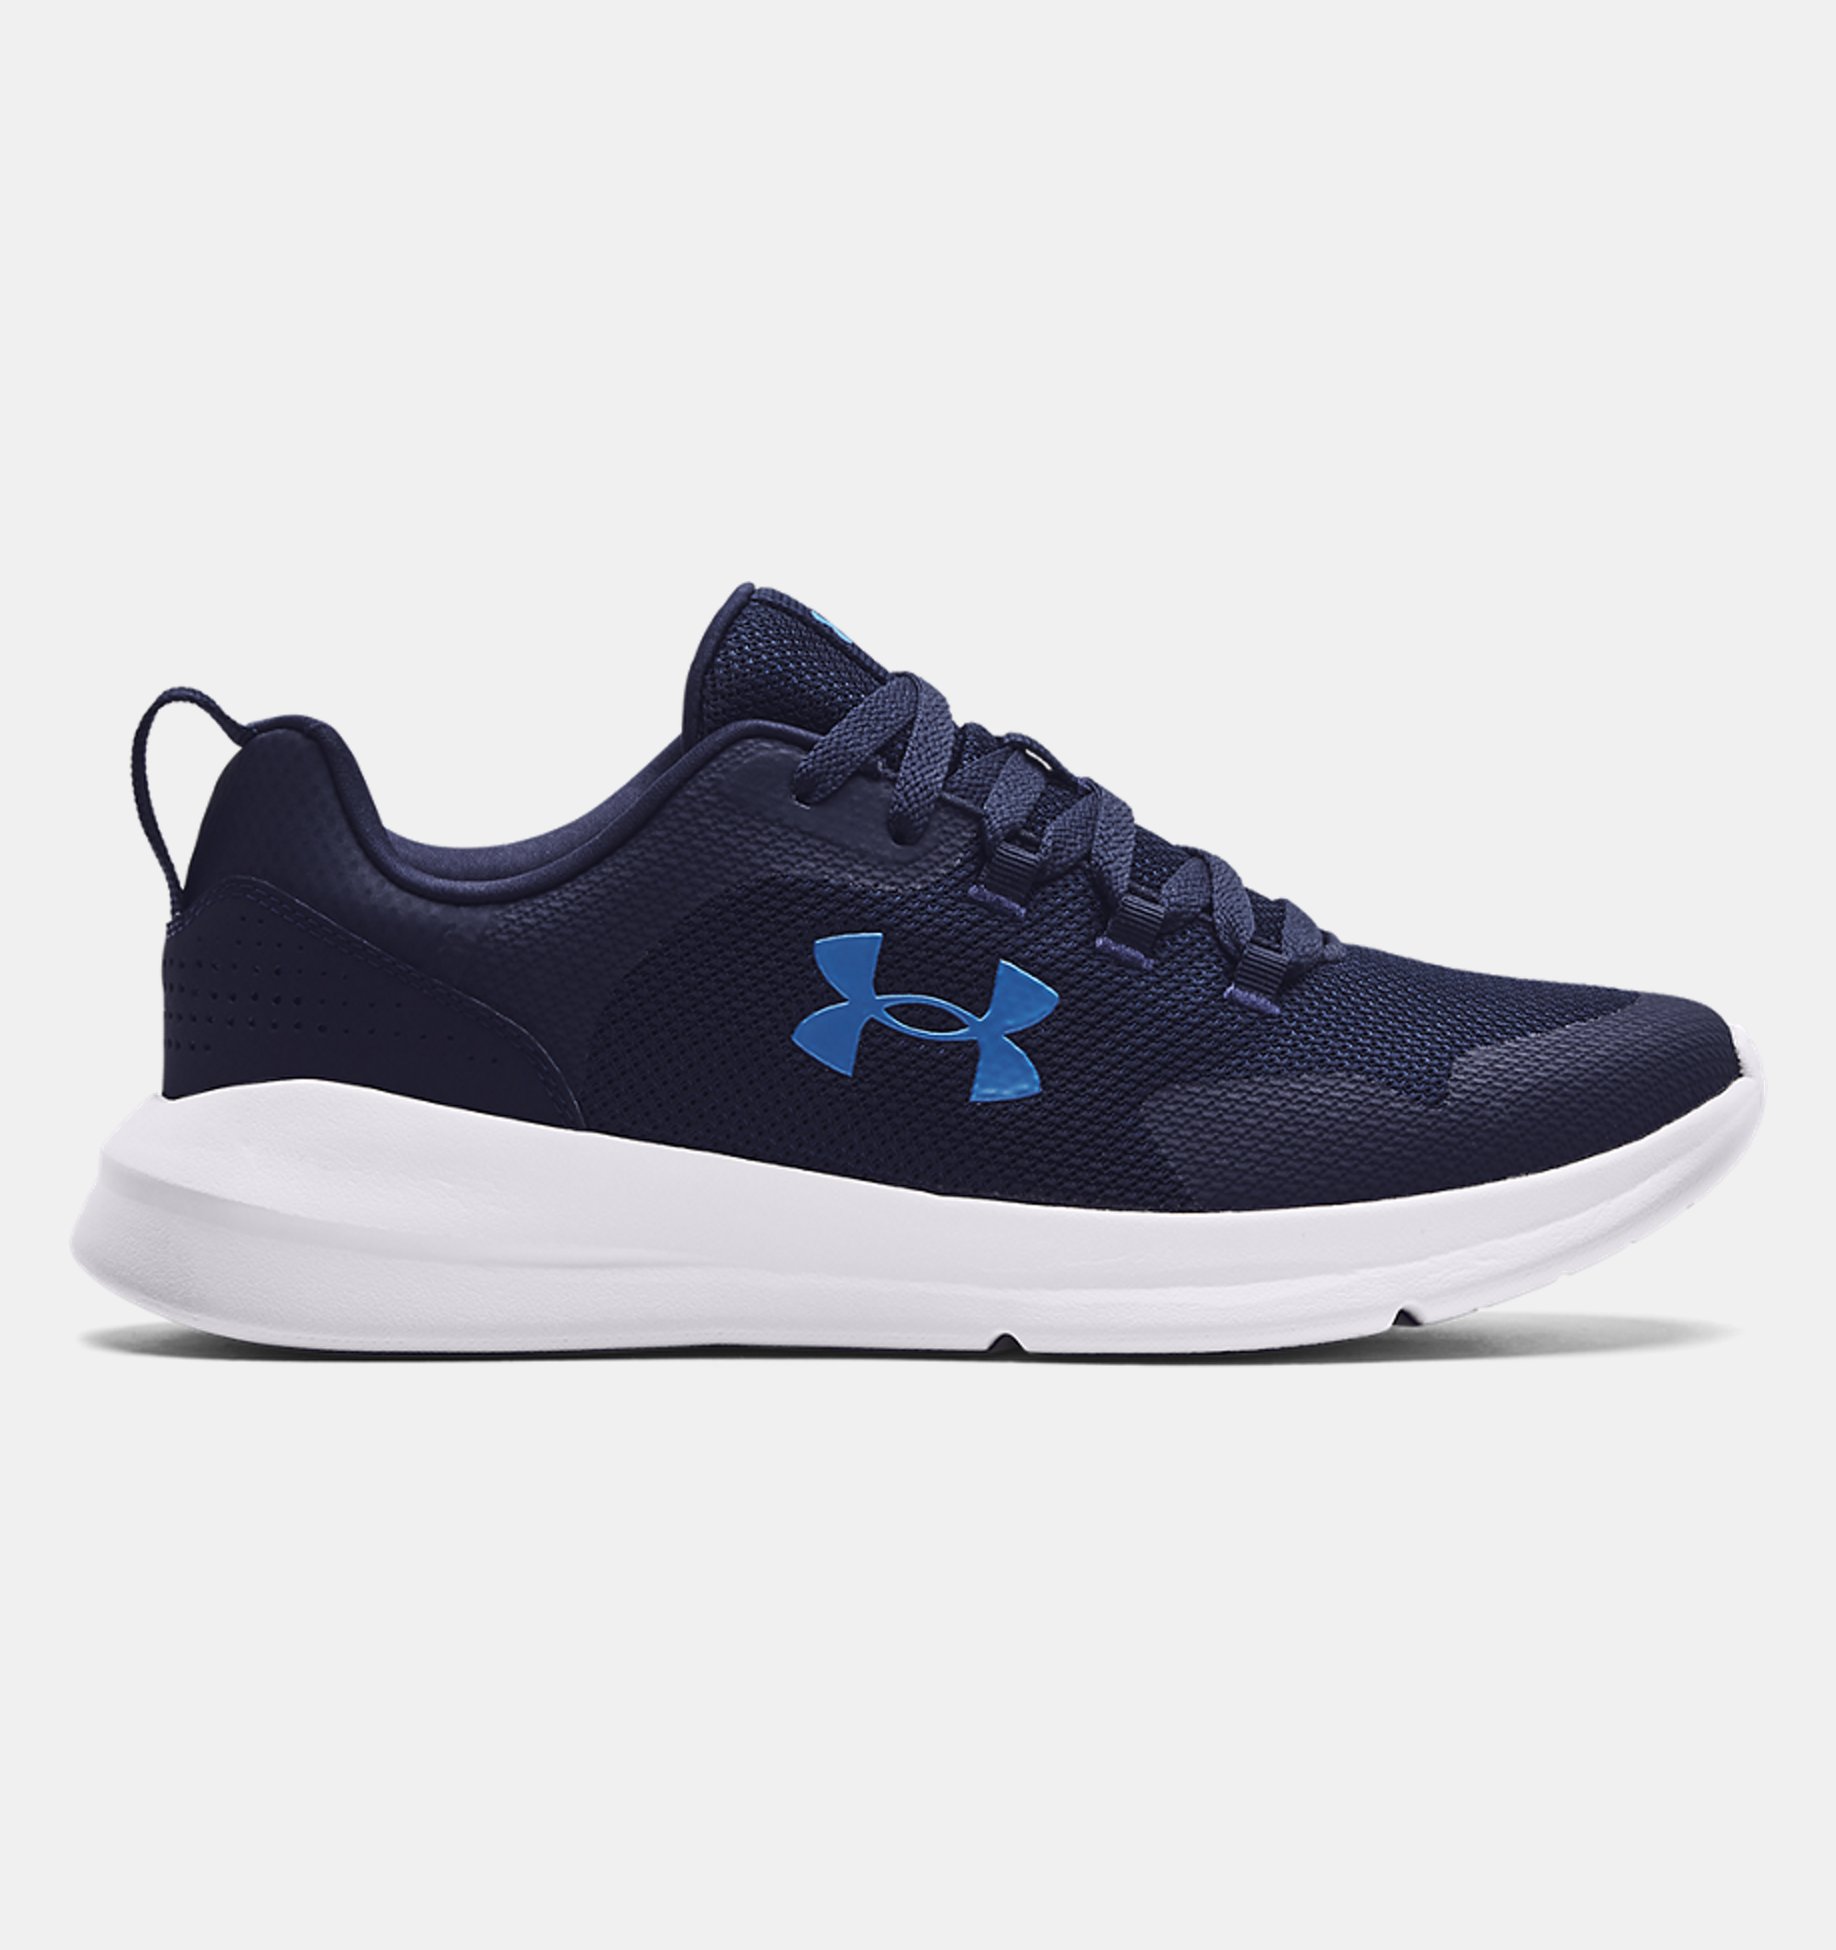 https://www.underarmour.com.ar/on/demandware.static/-/Sites-underarmour_staging/default/dw3f47ed6d/new_images/3022954/3022954-1.jpeg